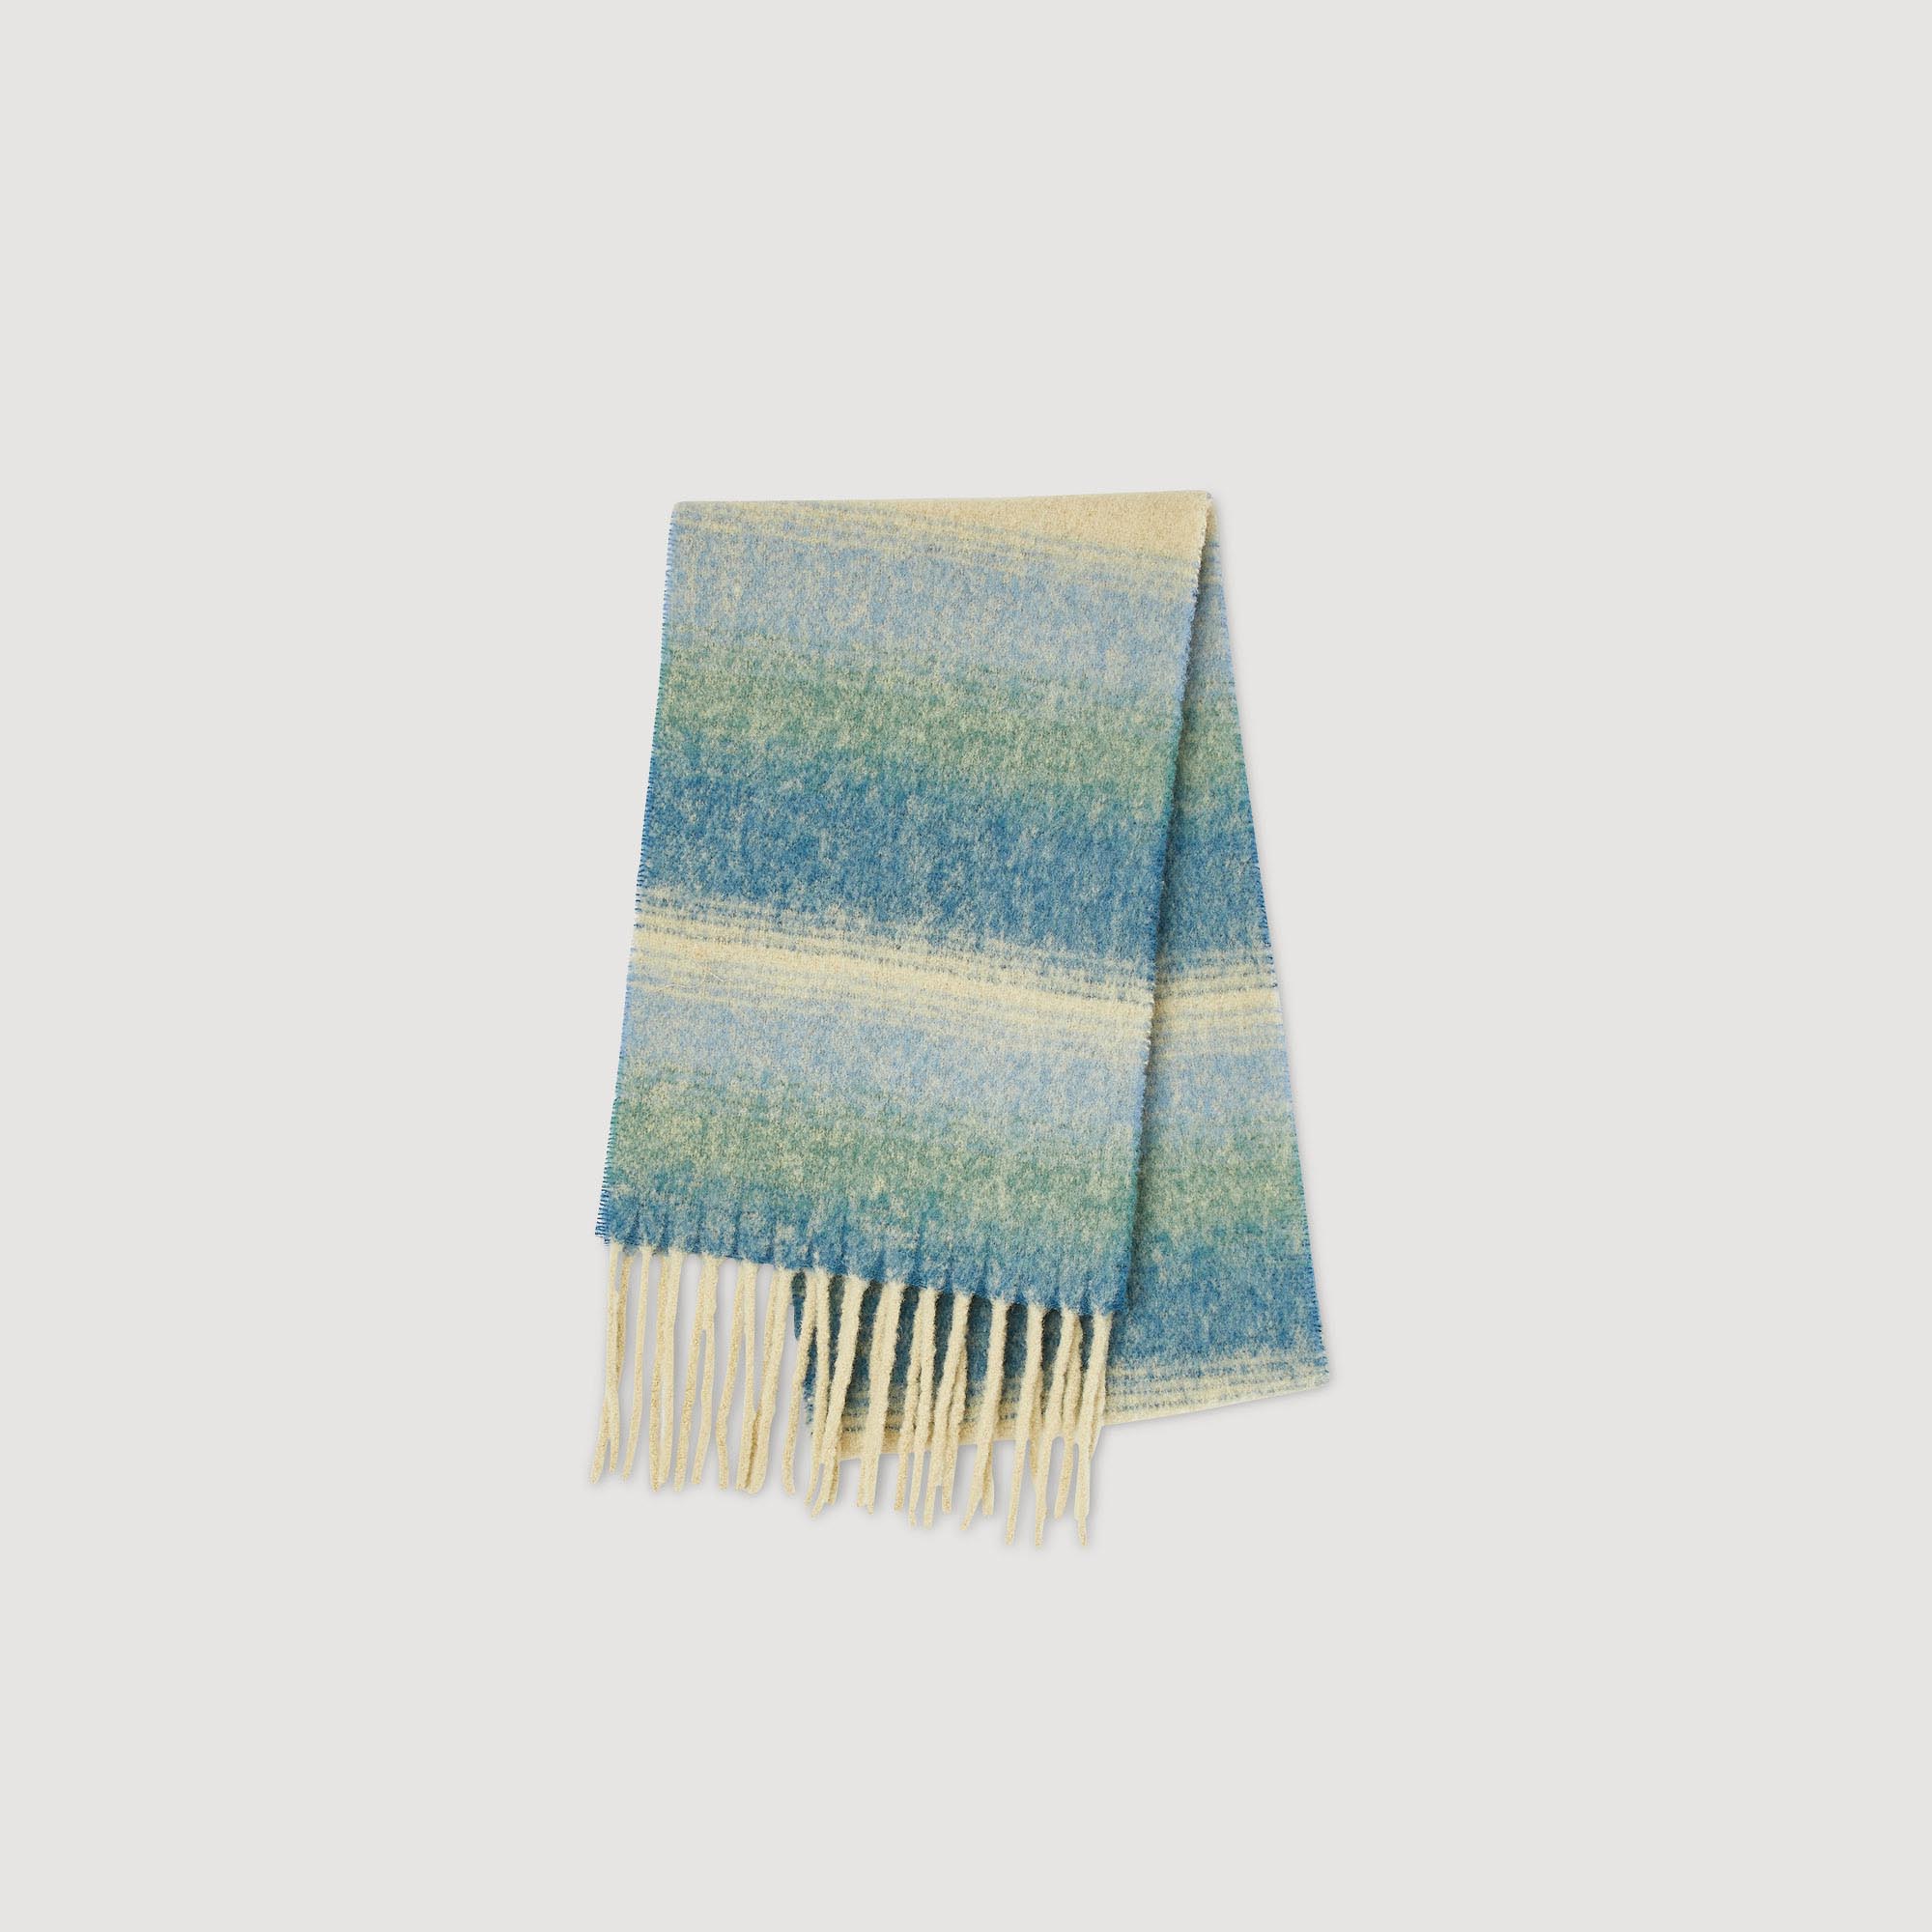 Sandro alpaca Alpaca blend scarf embellished with stripy motifs, fringed edges and a Sandro label